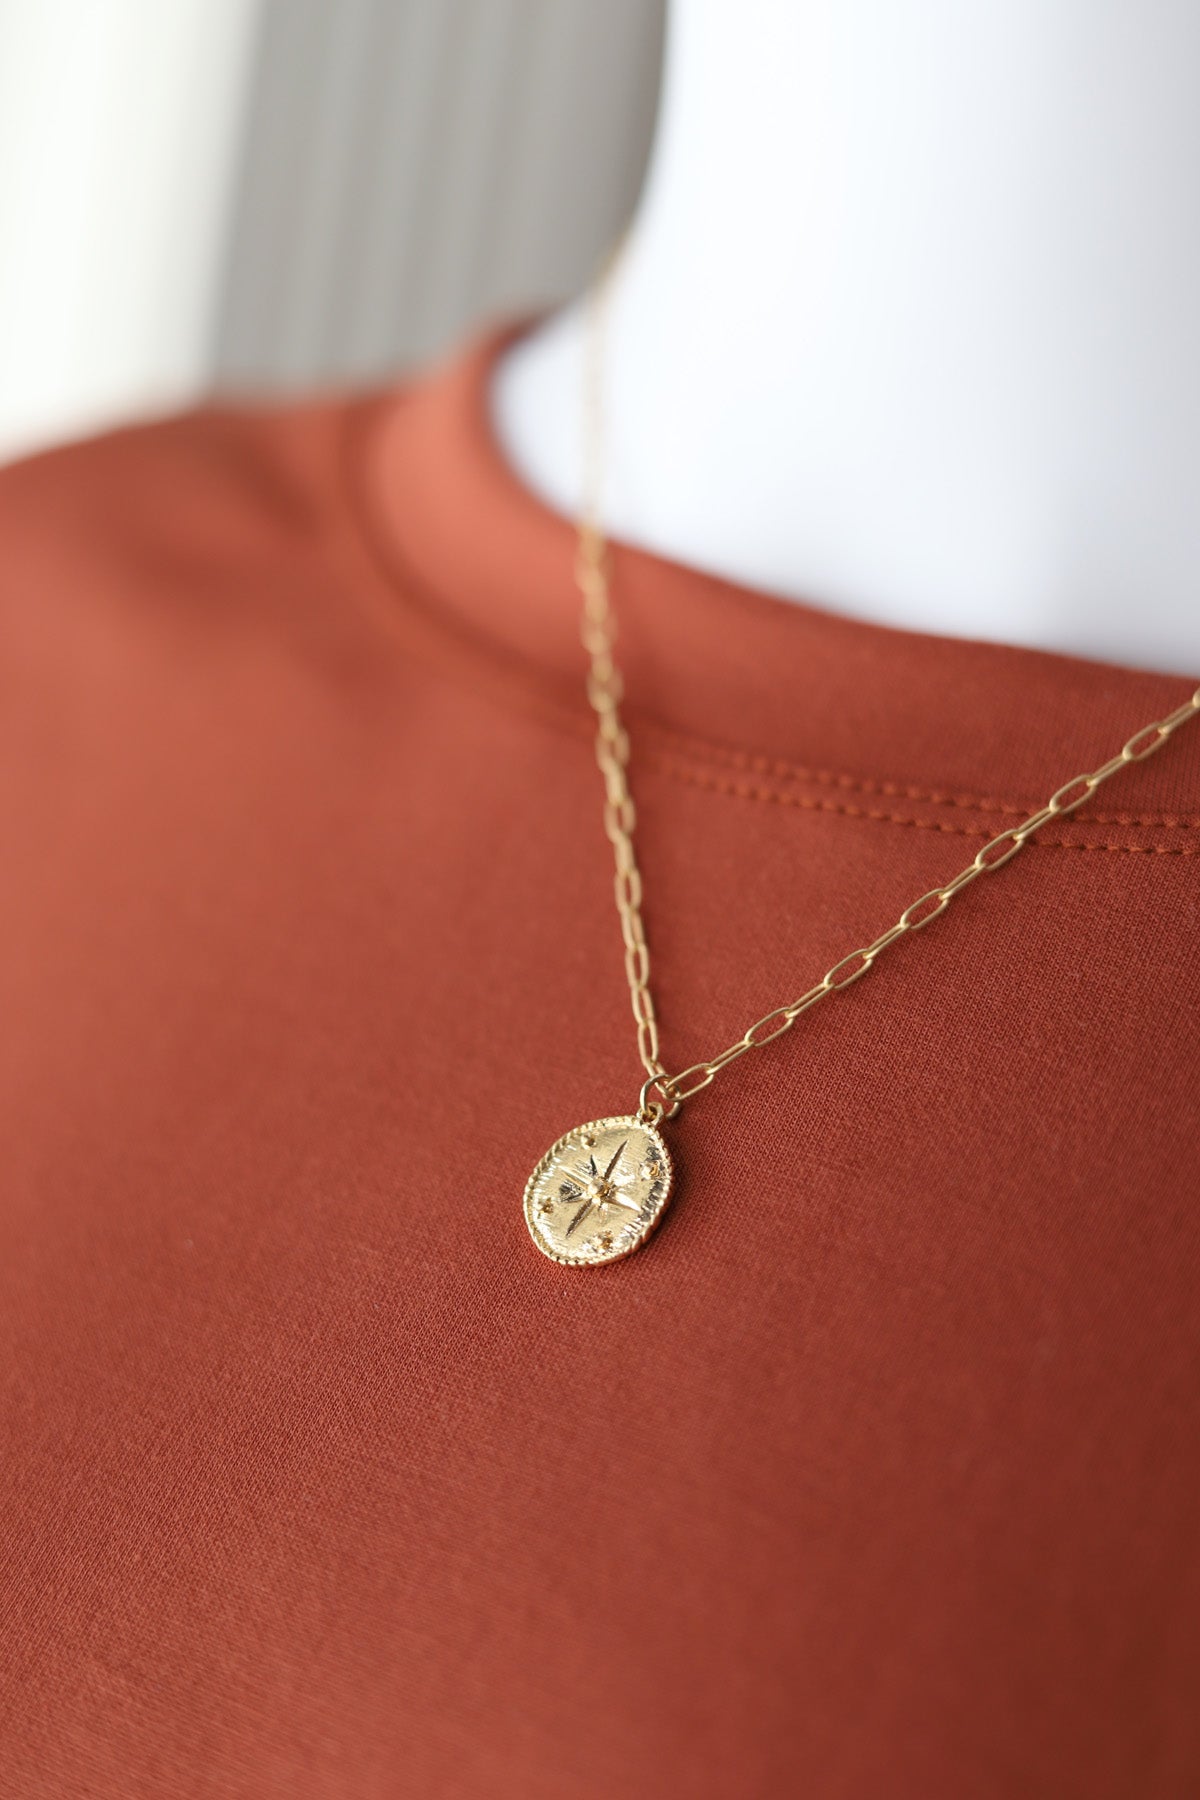 The North Star Necklace - Gold